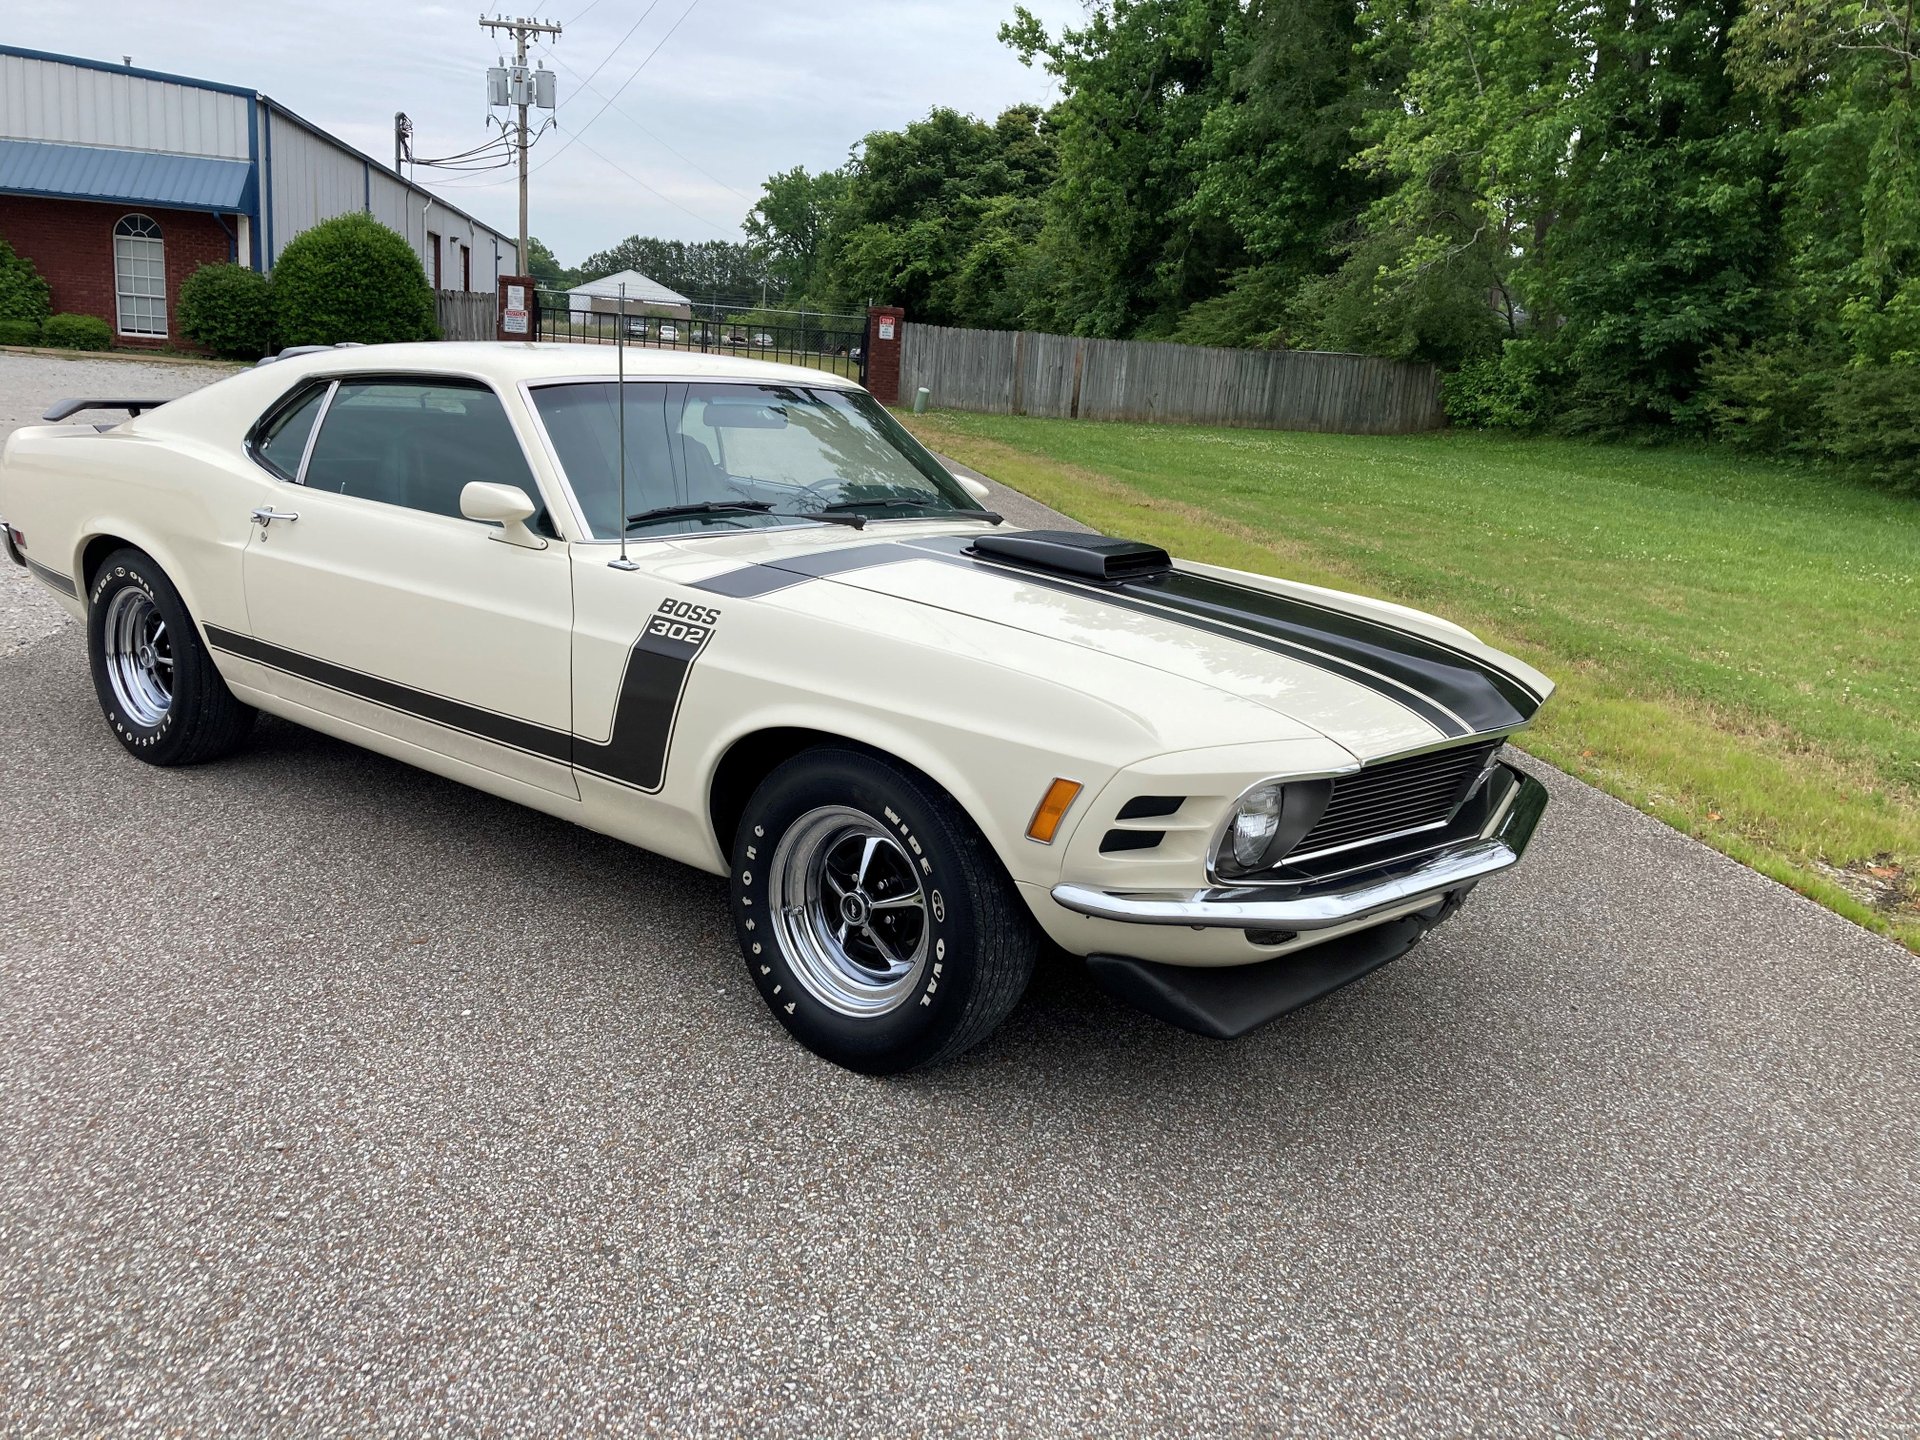 1970 Ford Mustang | GAA Classic Cars